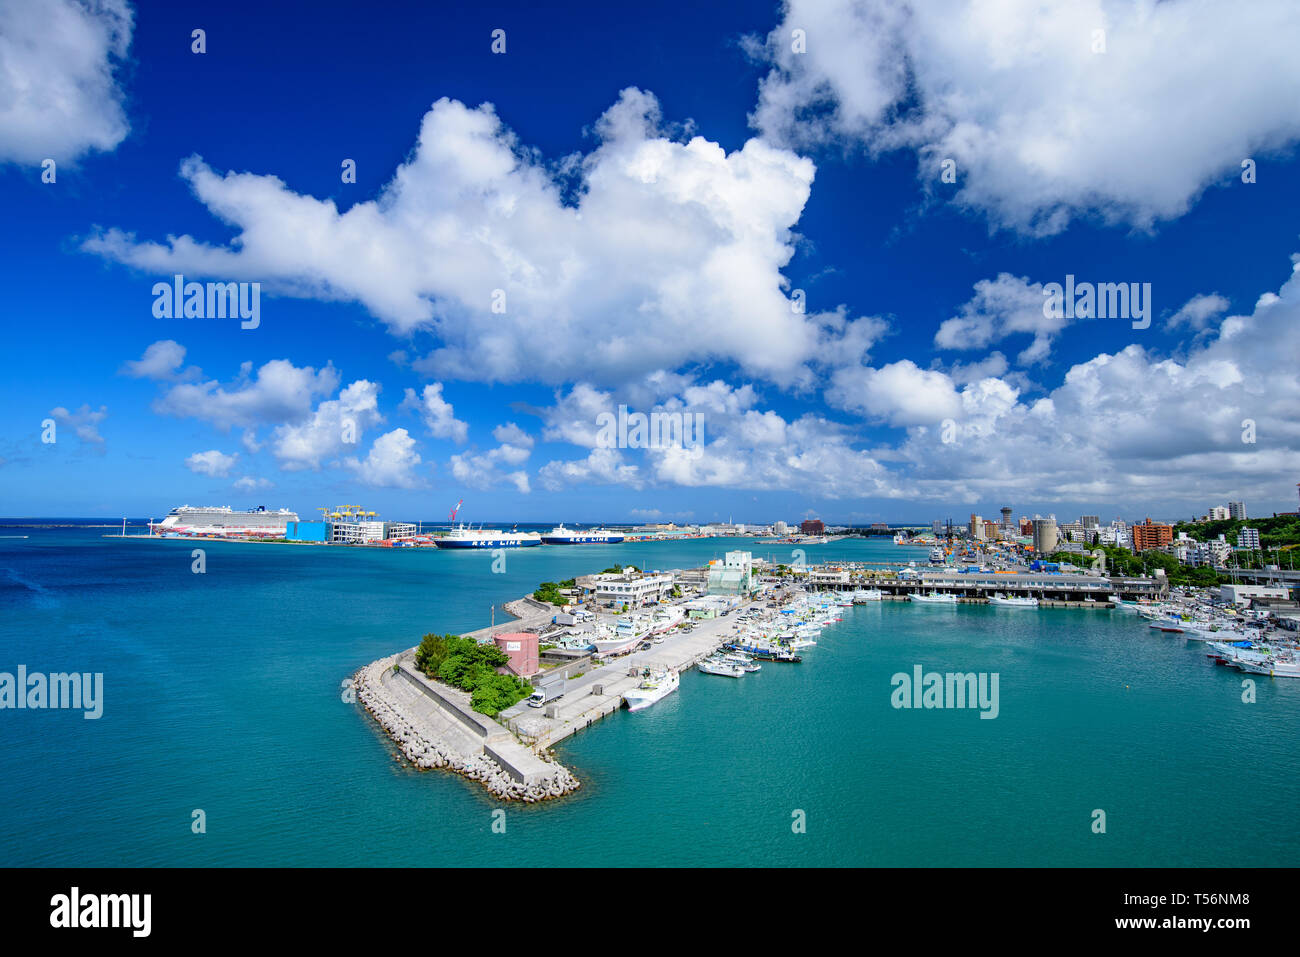 The aerial view of the harbor in Naha, Okinawa, Japan Stock Photo